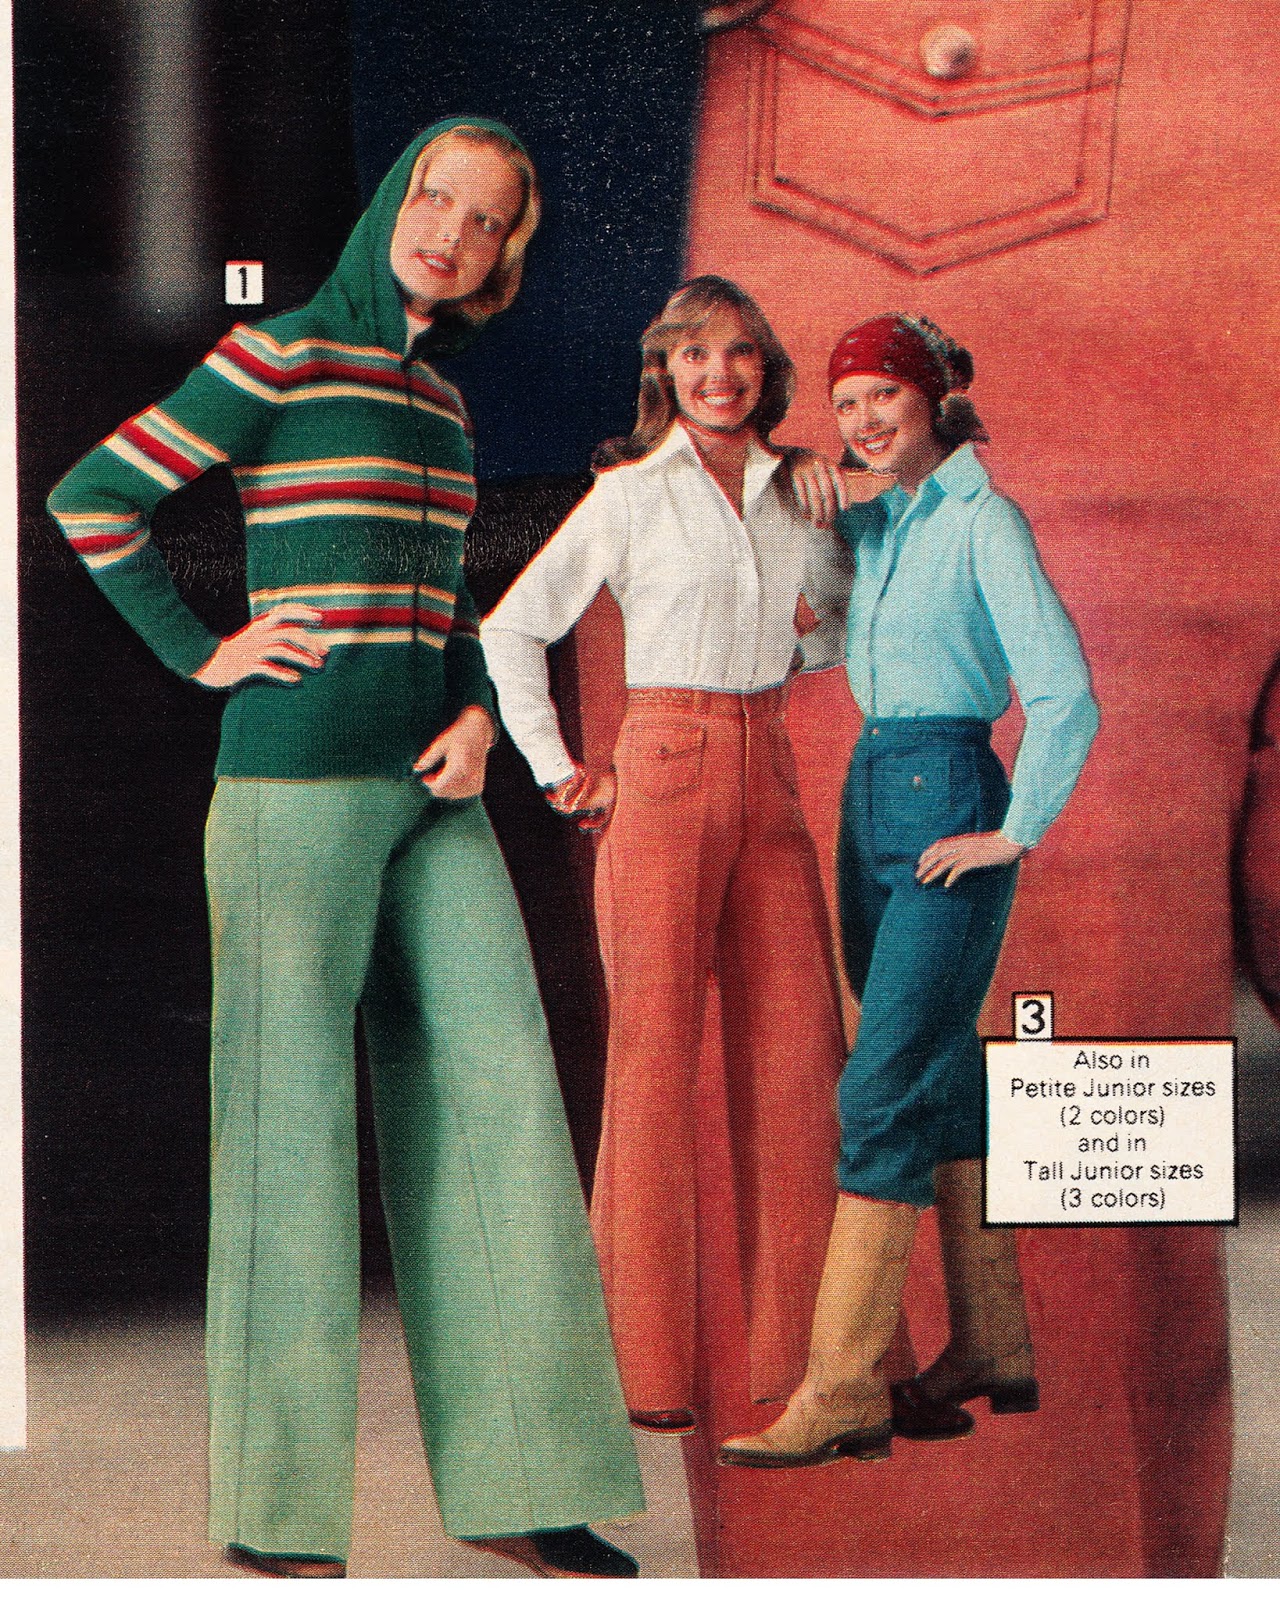 Kathy Loghry Blogspot: Classic Jeans of the 70s!!